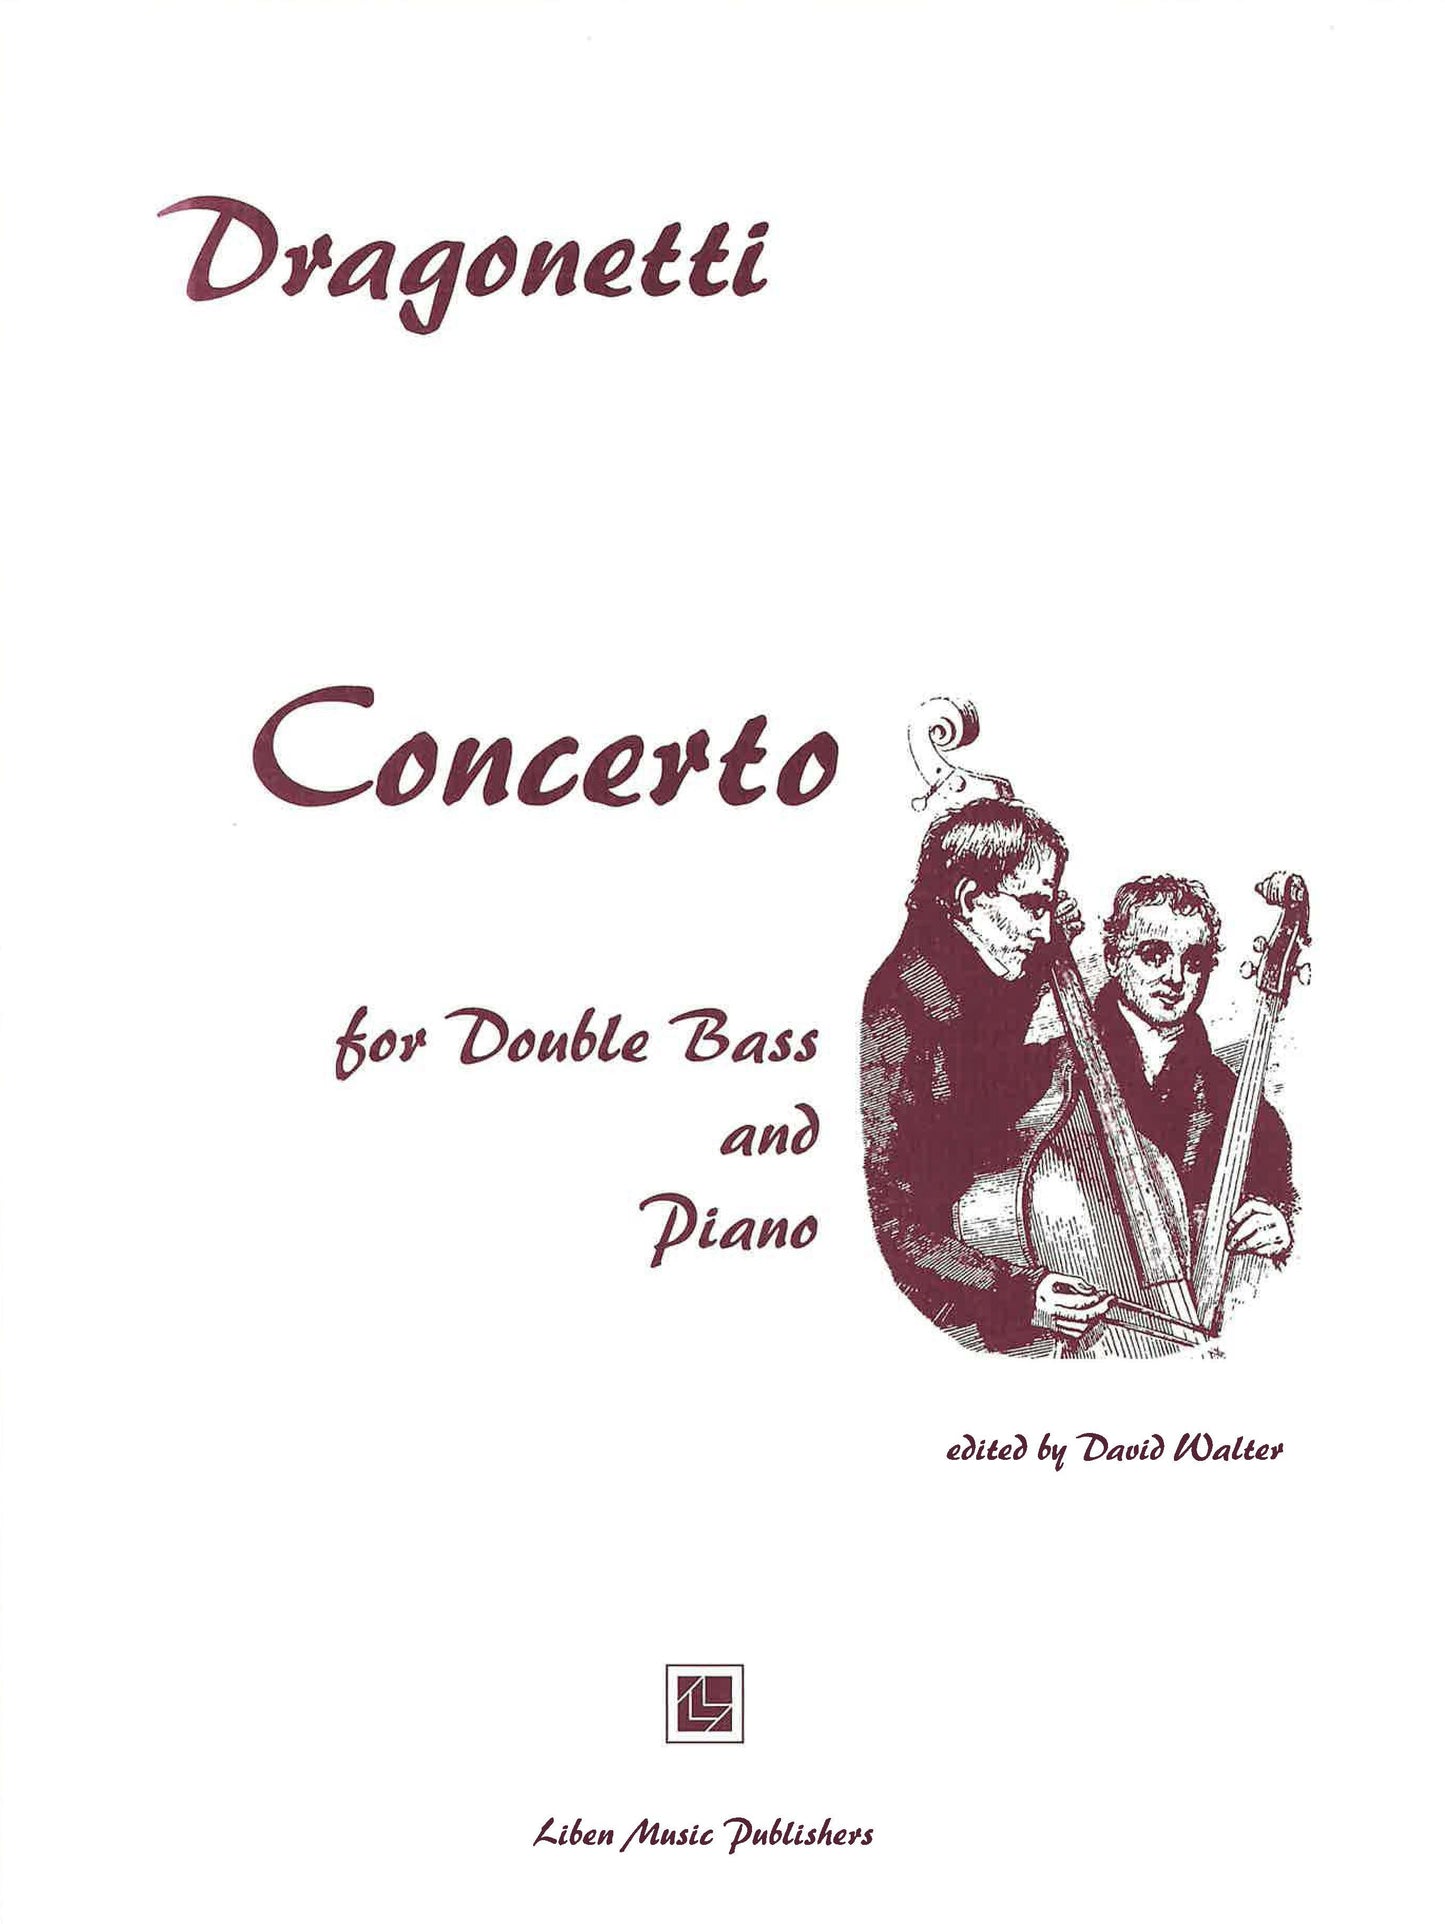 Dragonetti: Concerto for Double Bass